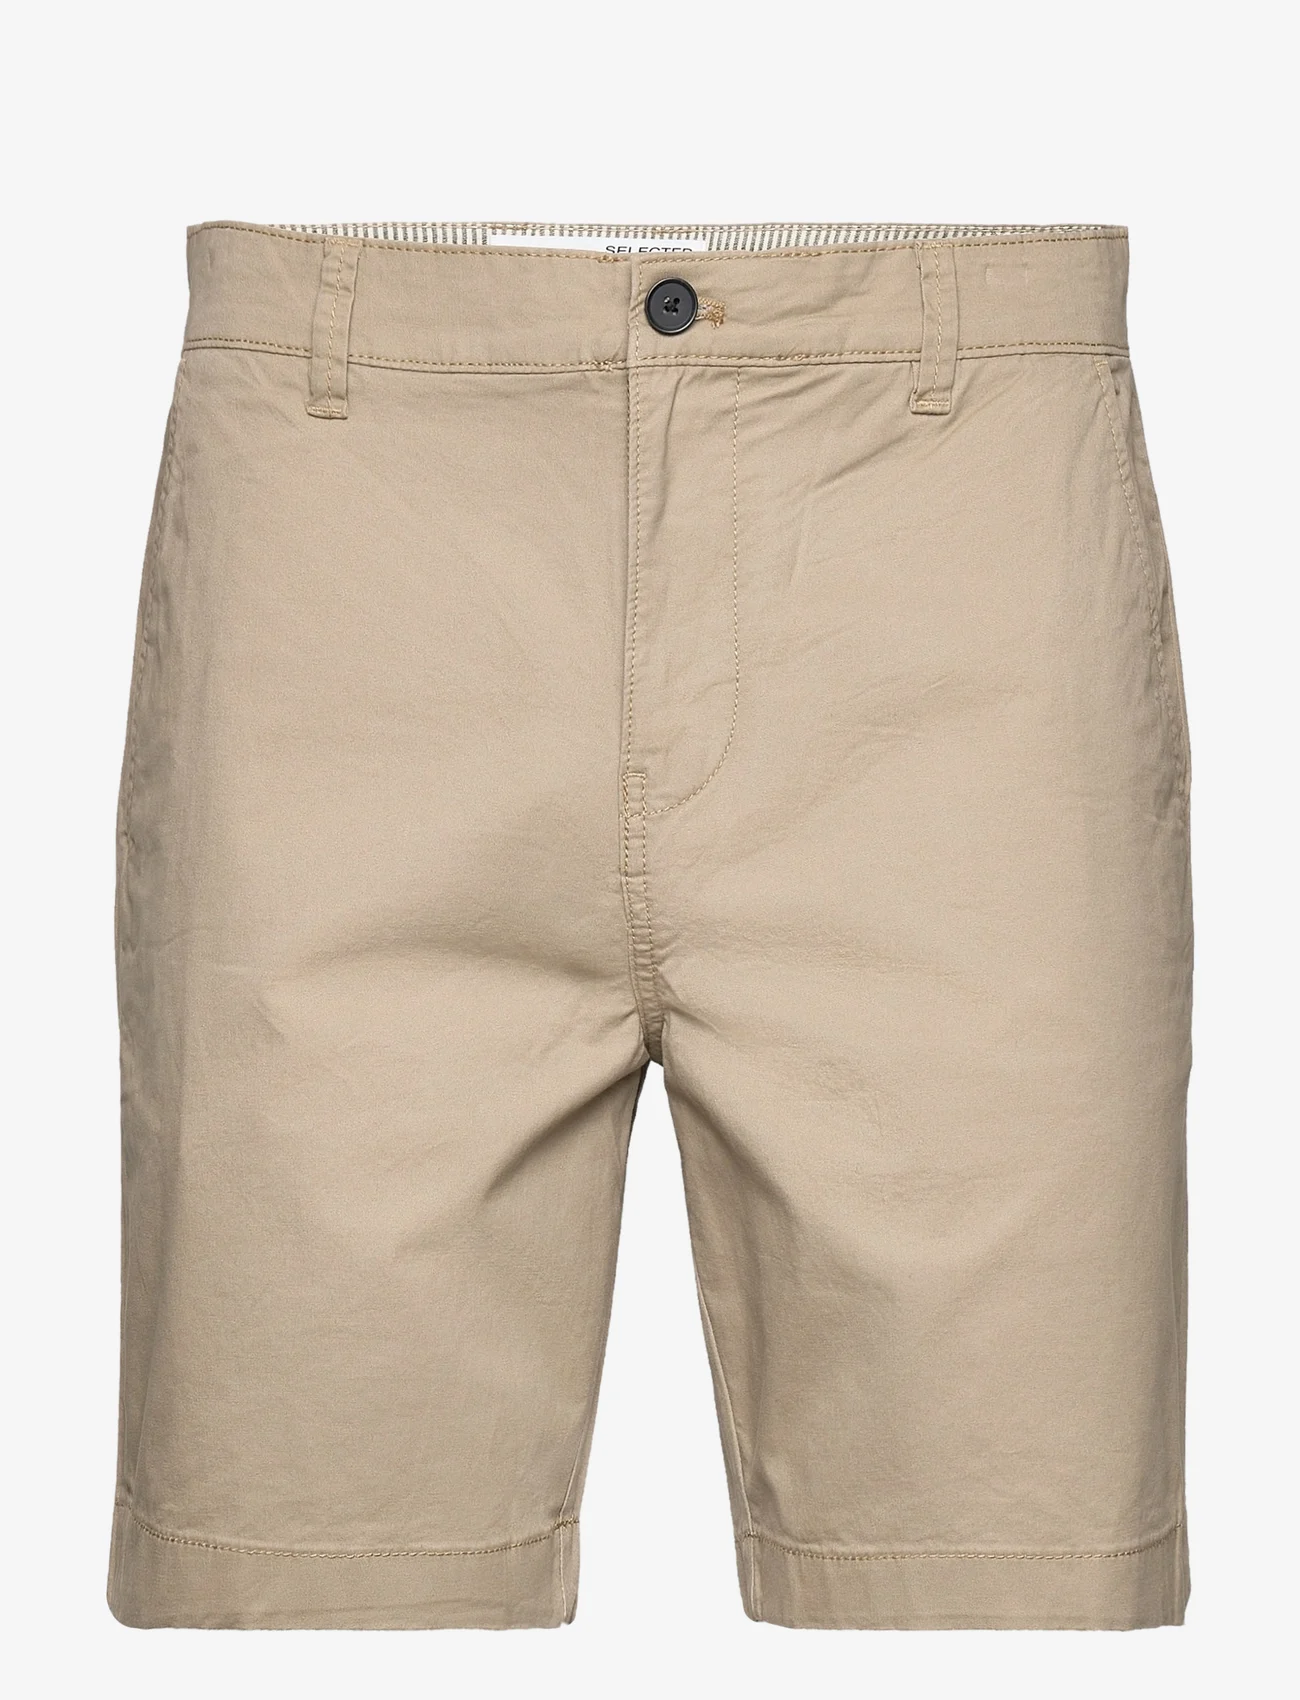 Selected Homme - SLHCOMFORT-HOMME FLEX SHORTS W NOOS - chinos shorts - chinchilla - 0